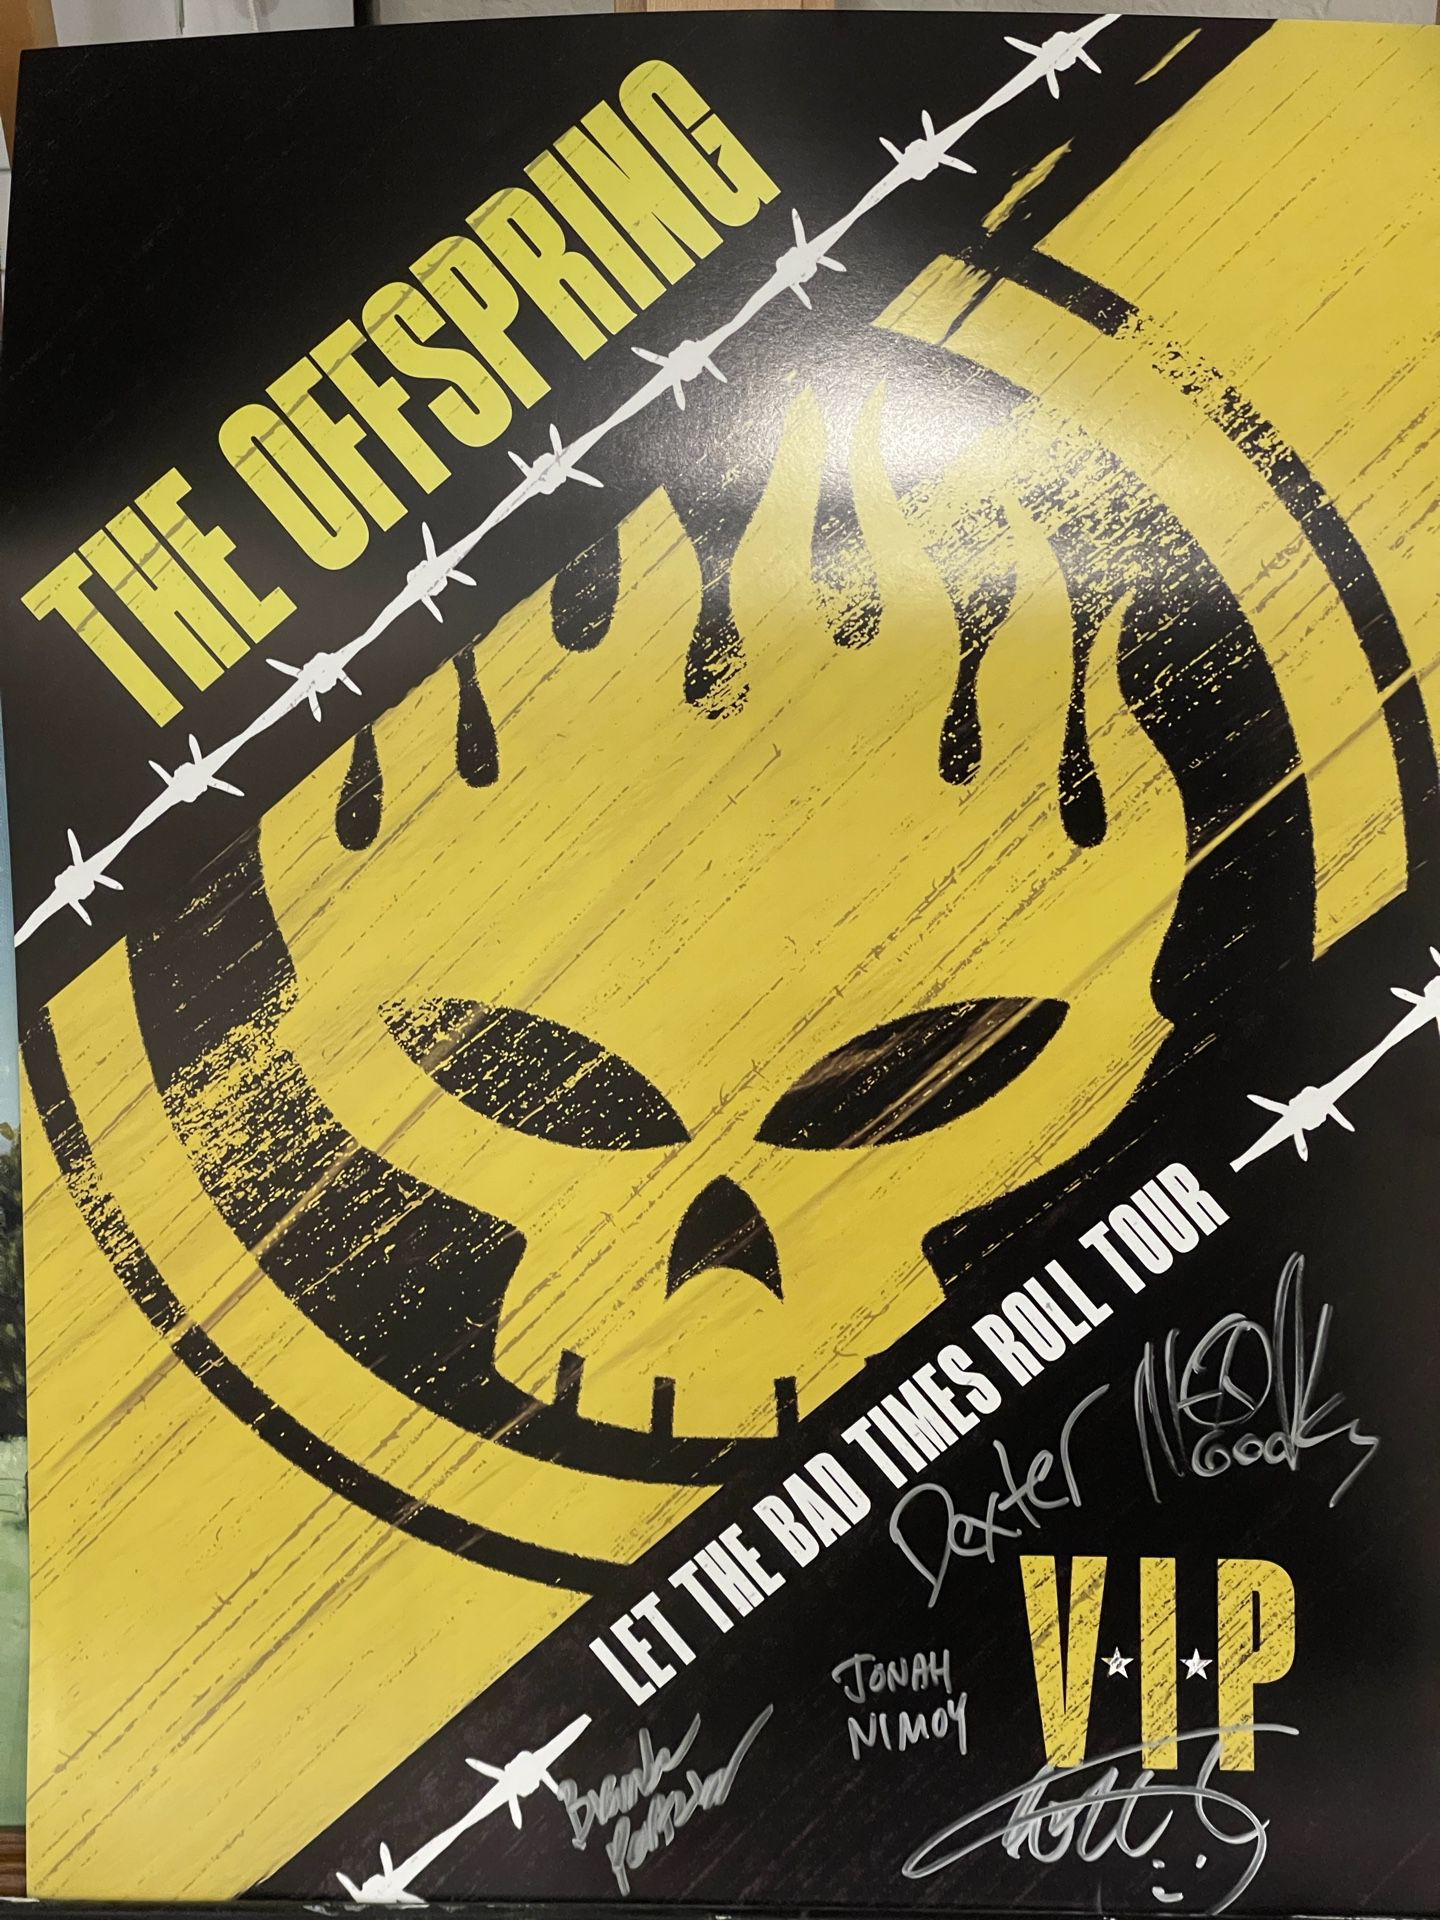 The Offspring - Signed Tour Poster MINT